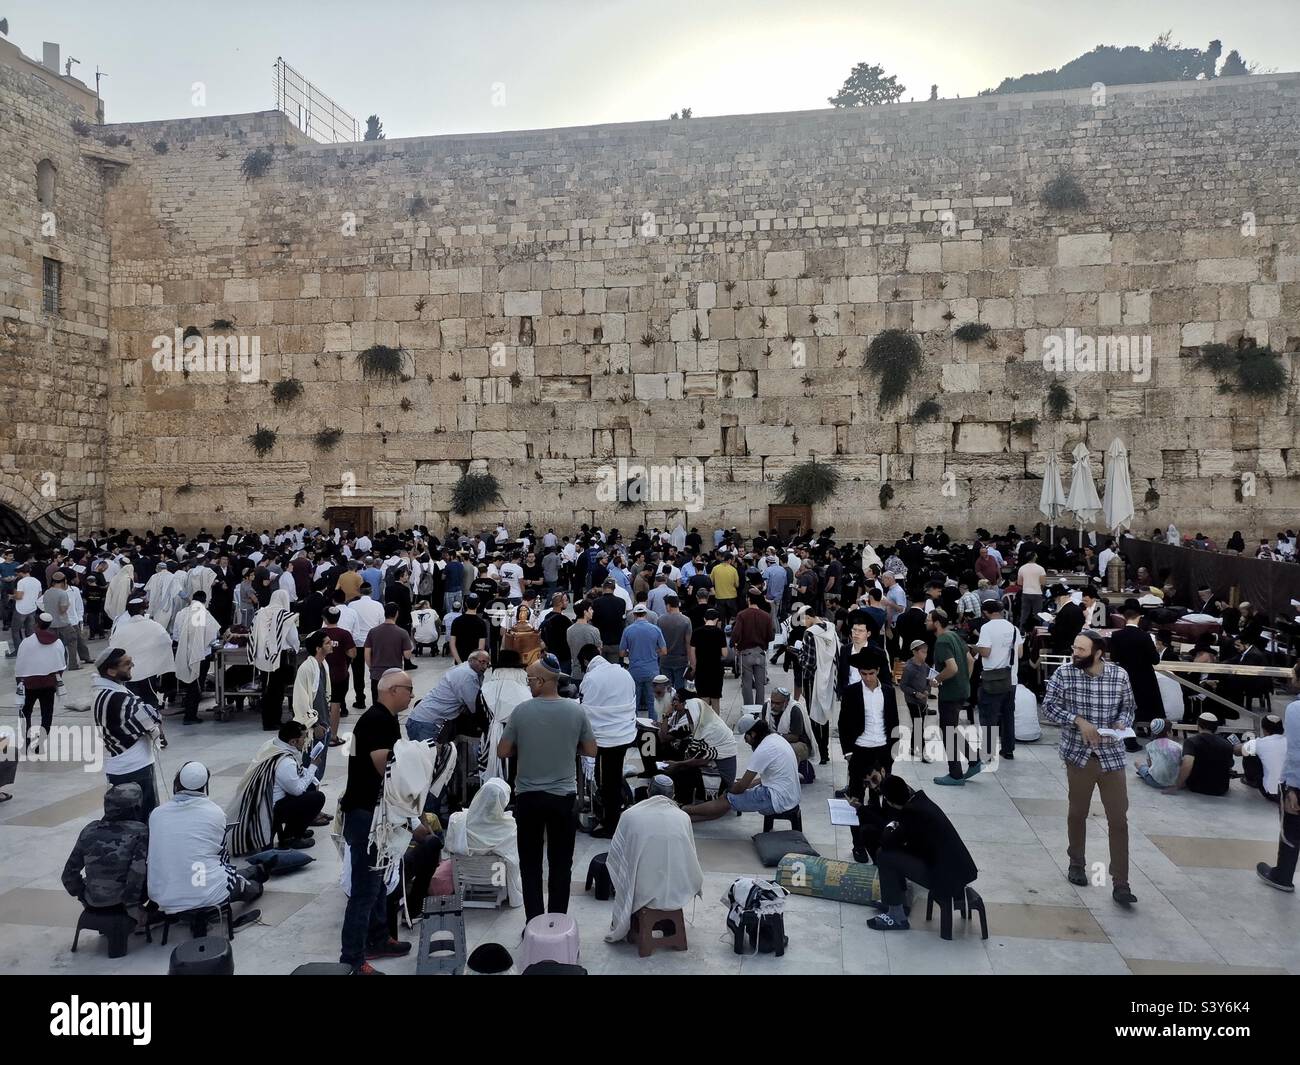 Prayers by the wailing wall in Jerusalem, Israel. Stock Photo